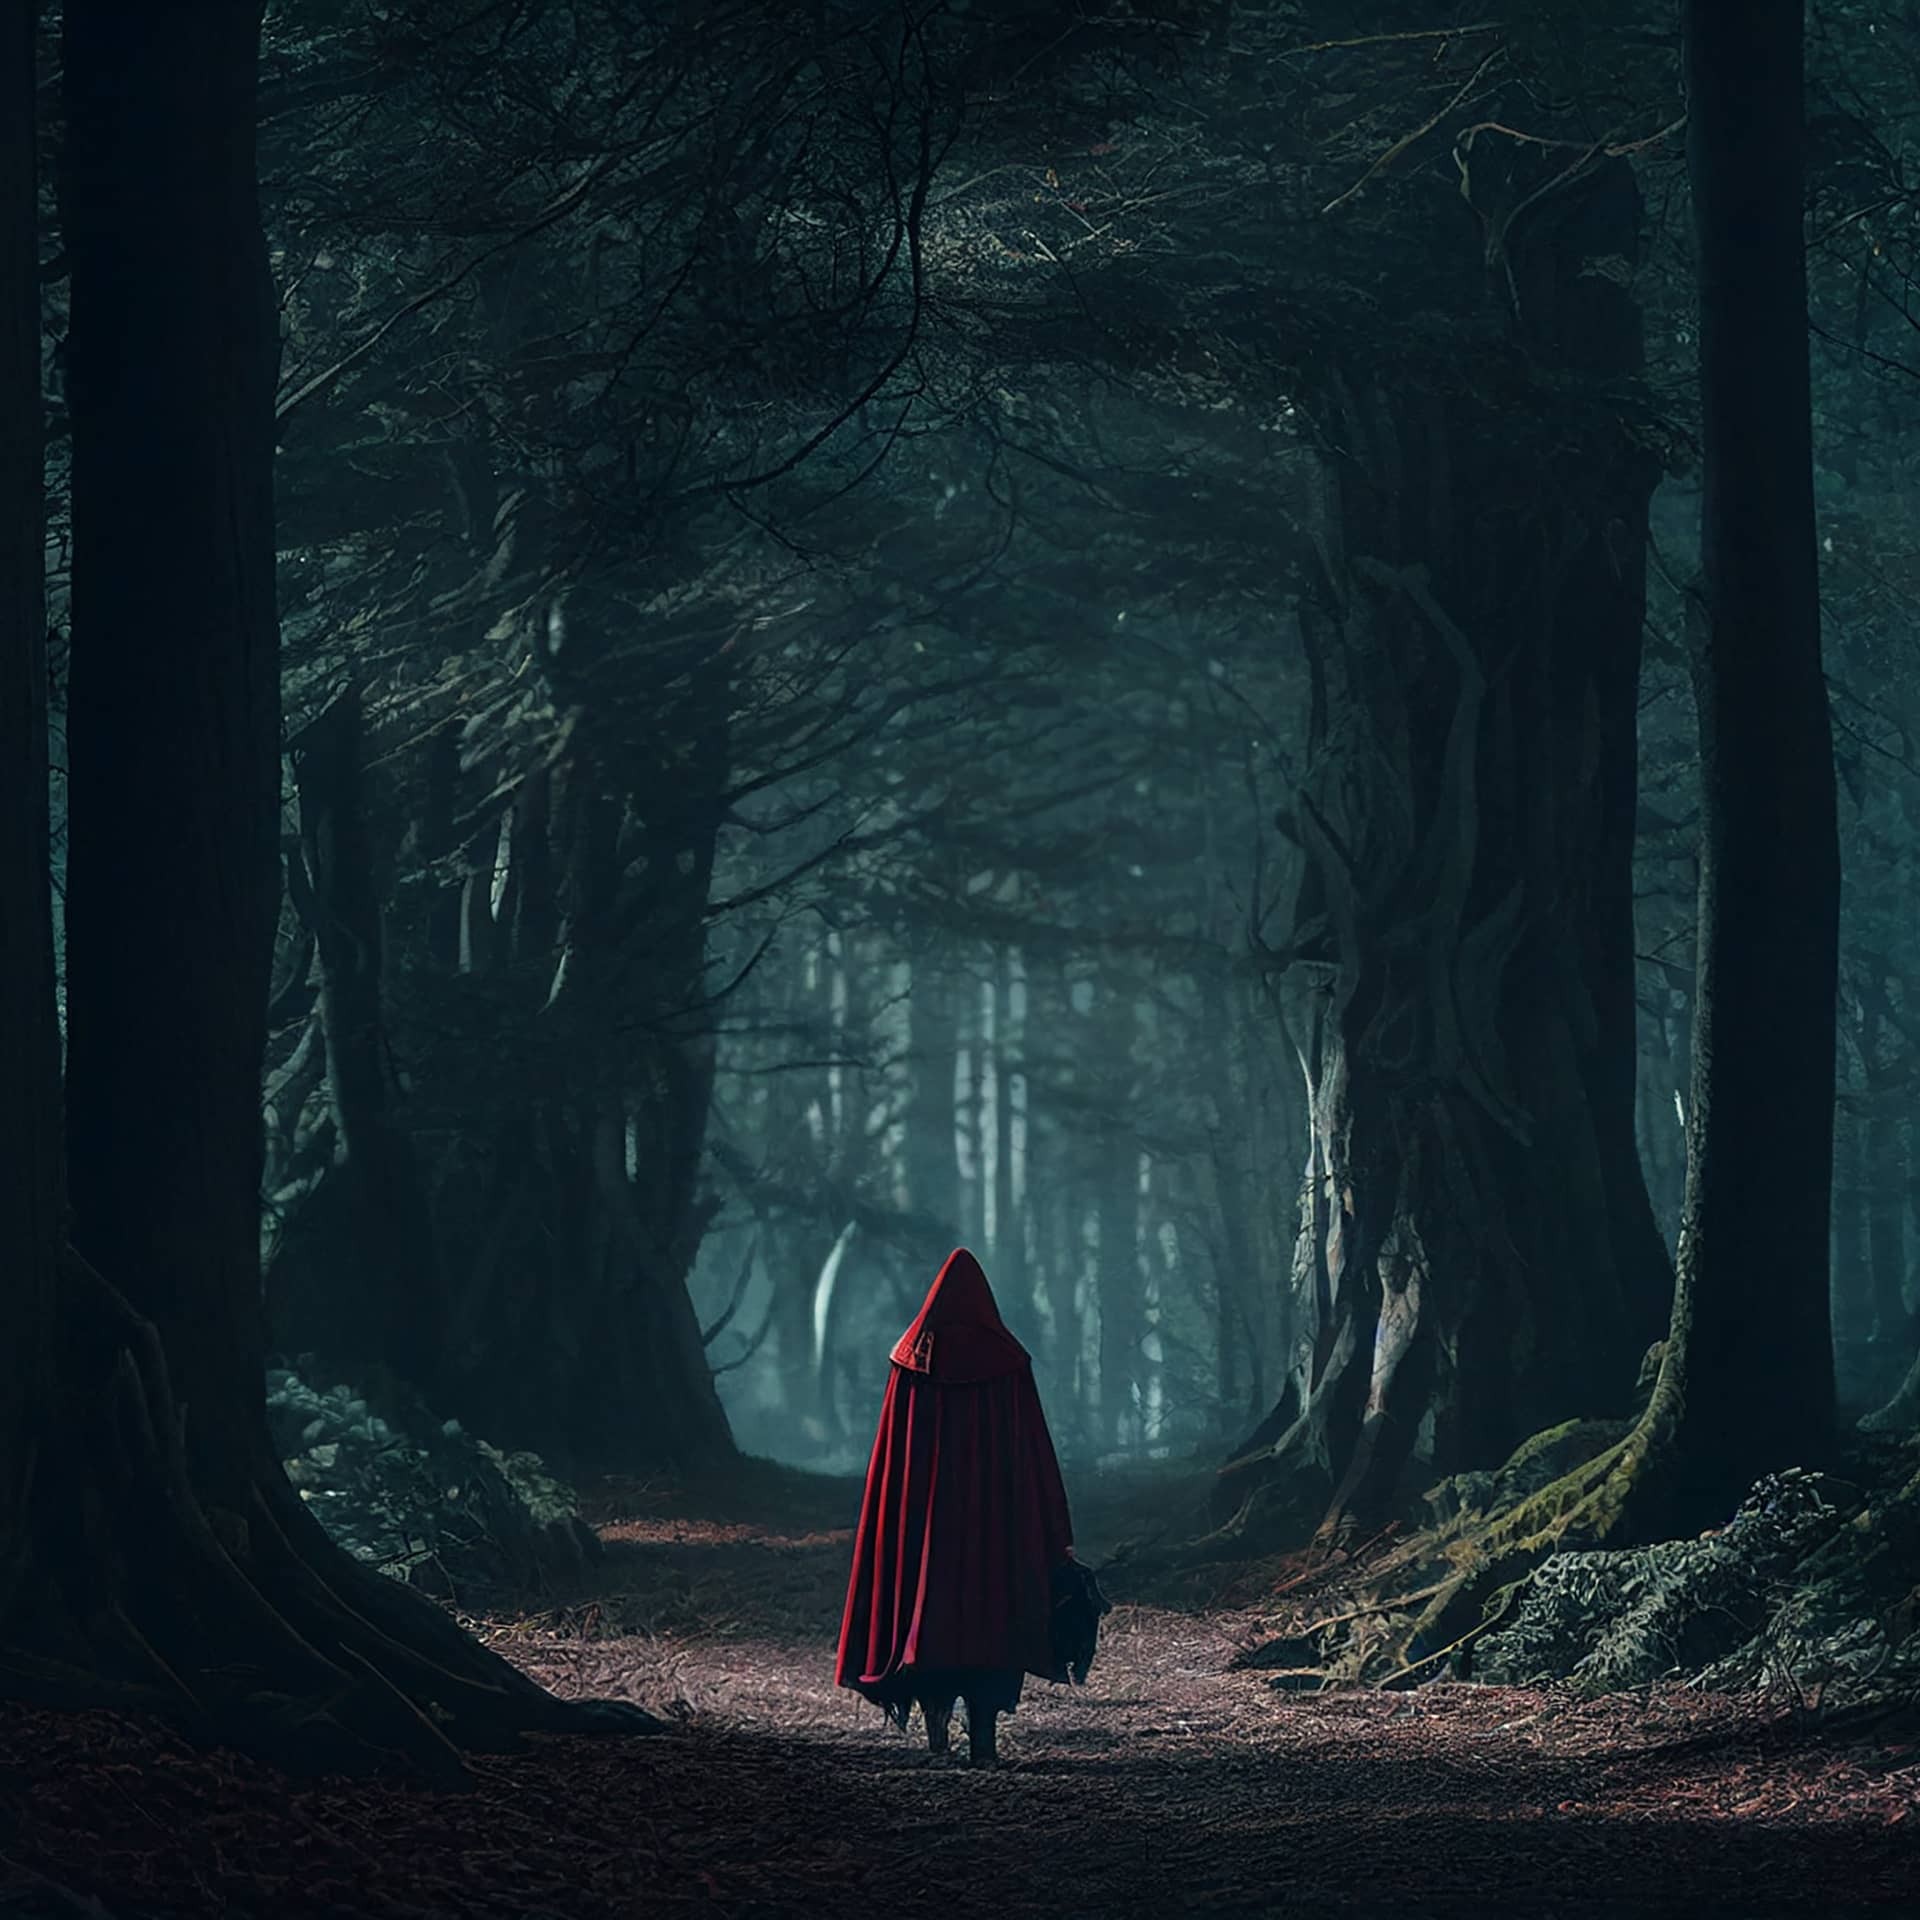 Woods somewhere red riding hood cinematic horror image